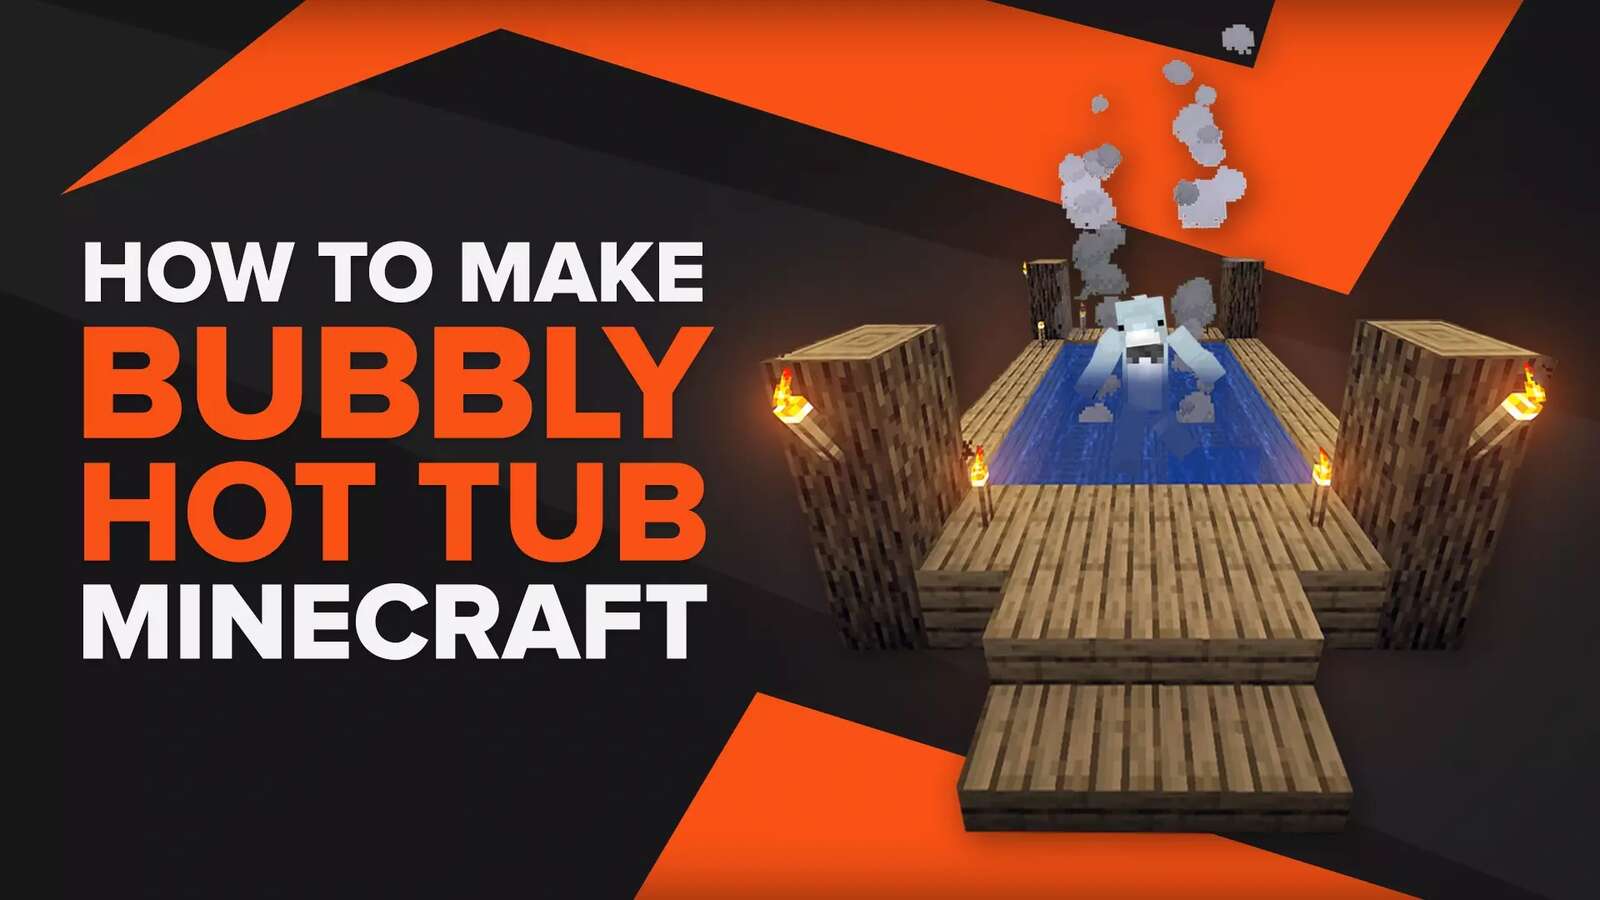 How to Make a Bubbly Hot Tub in Minecraft [3 Ideas]